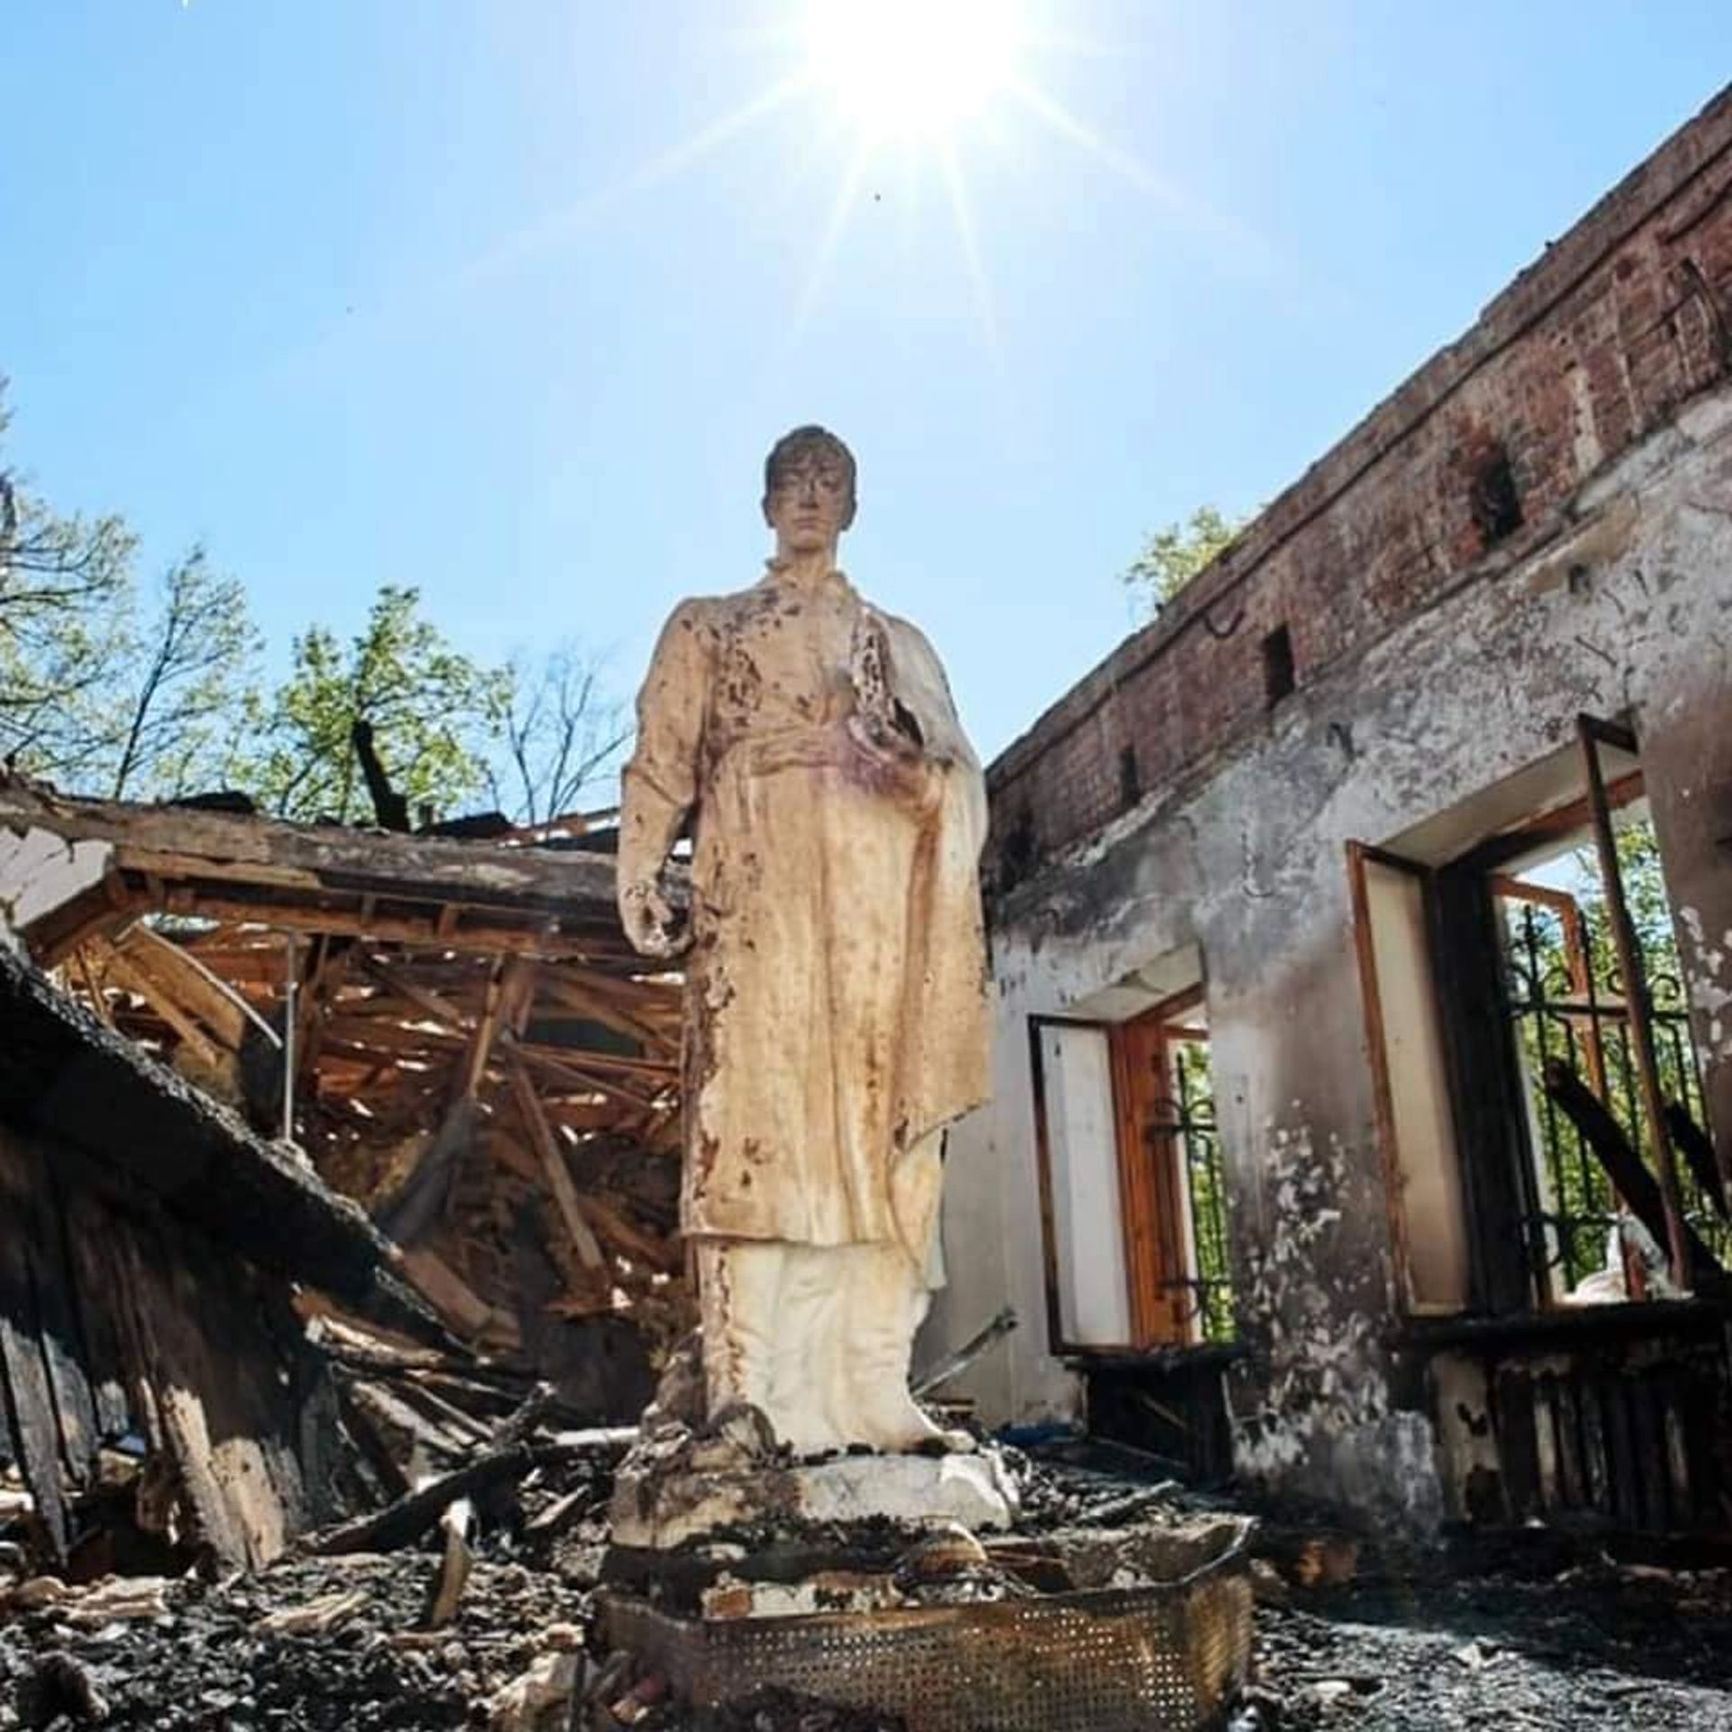 The statue of Hryhorii Skovoroda after the missile attack on the museum